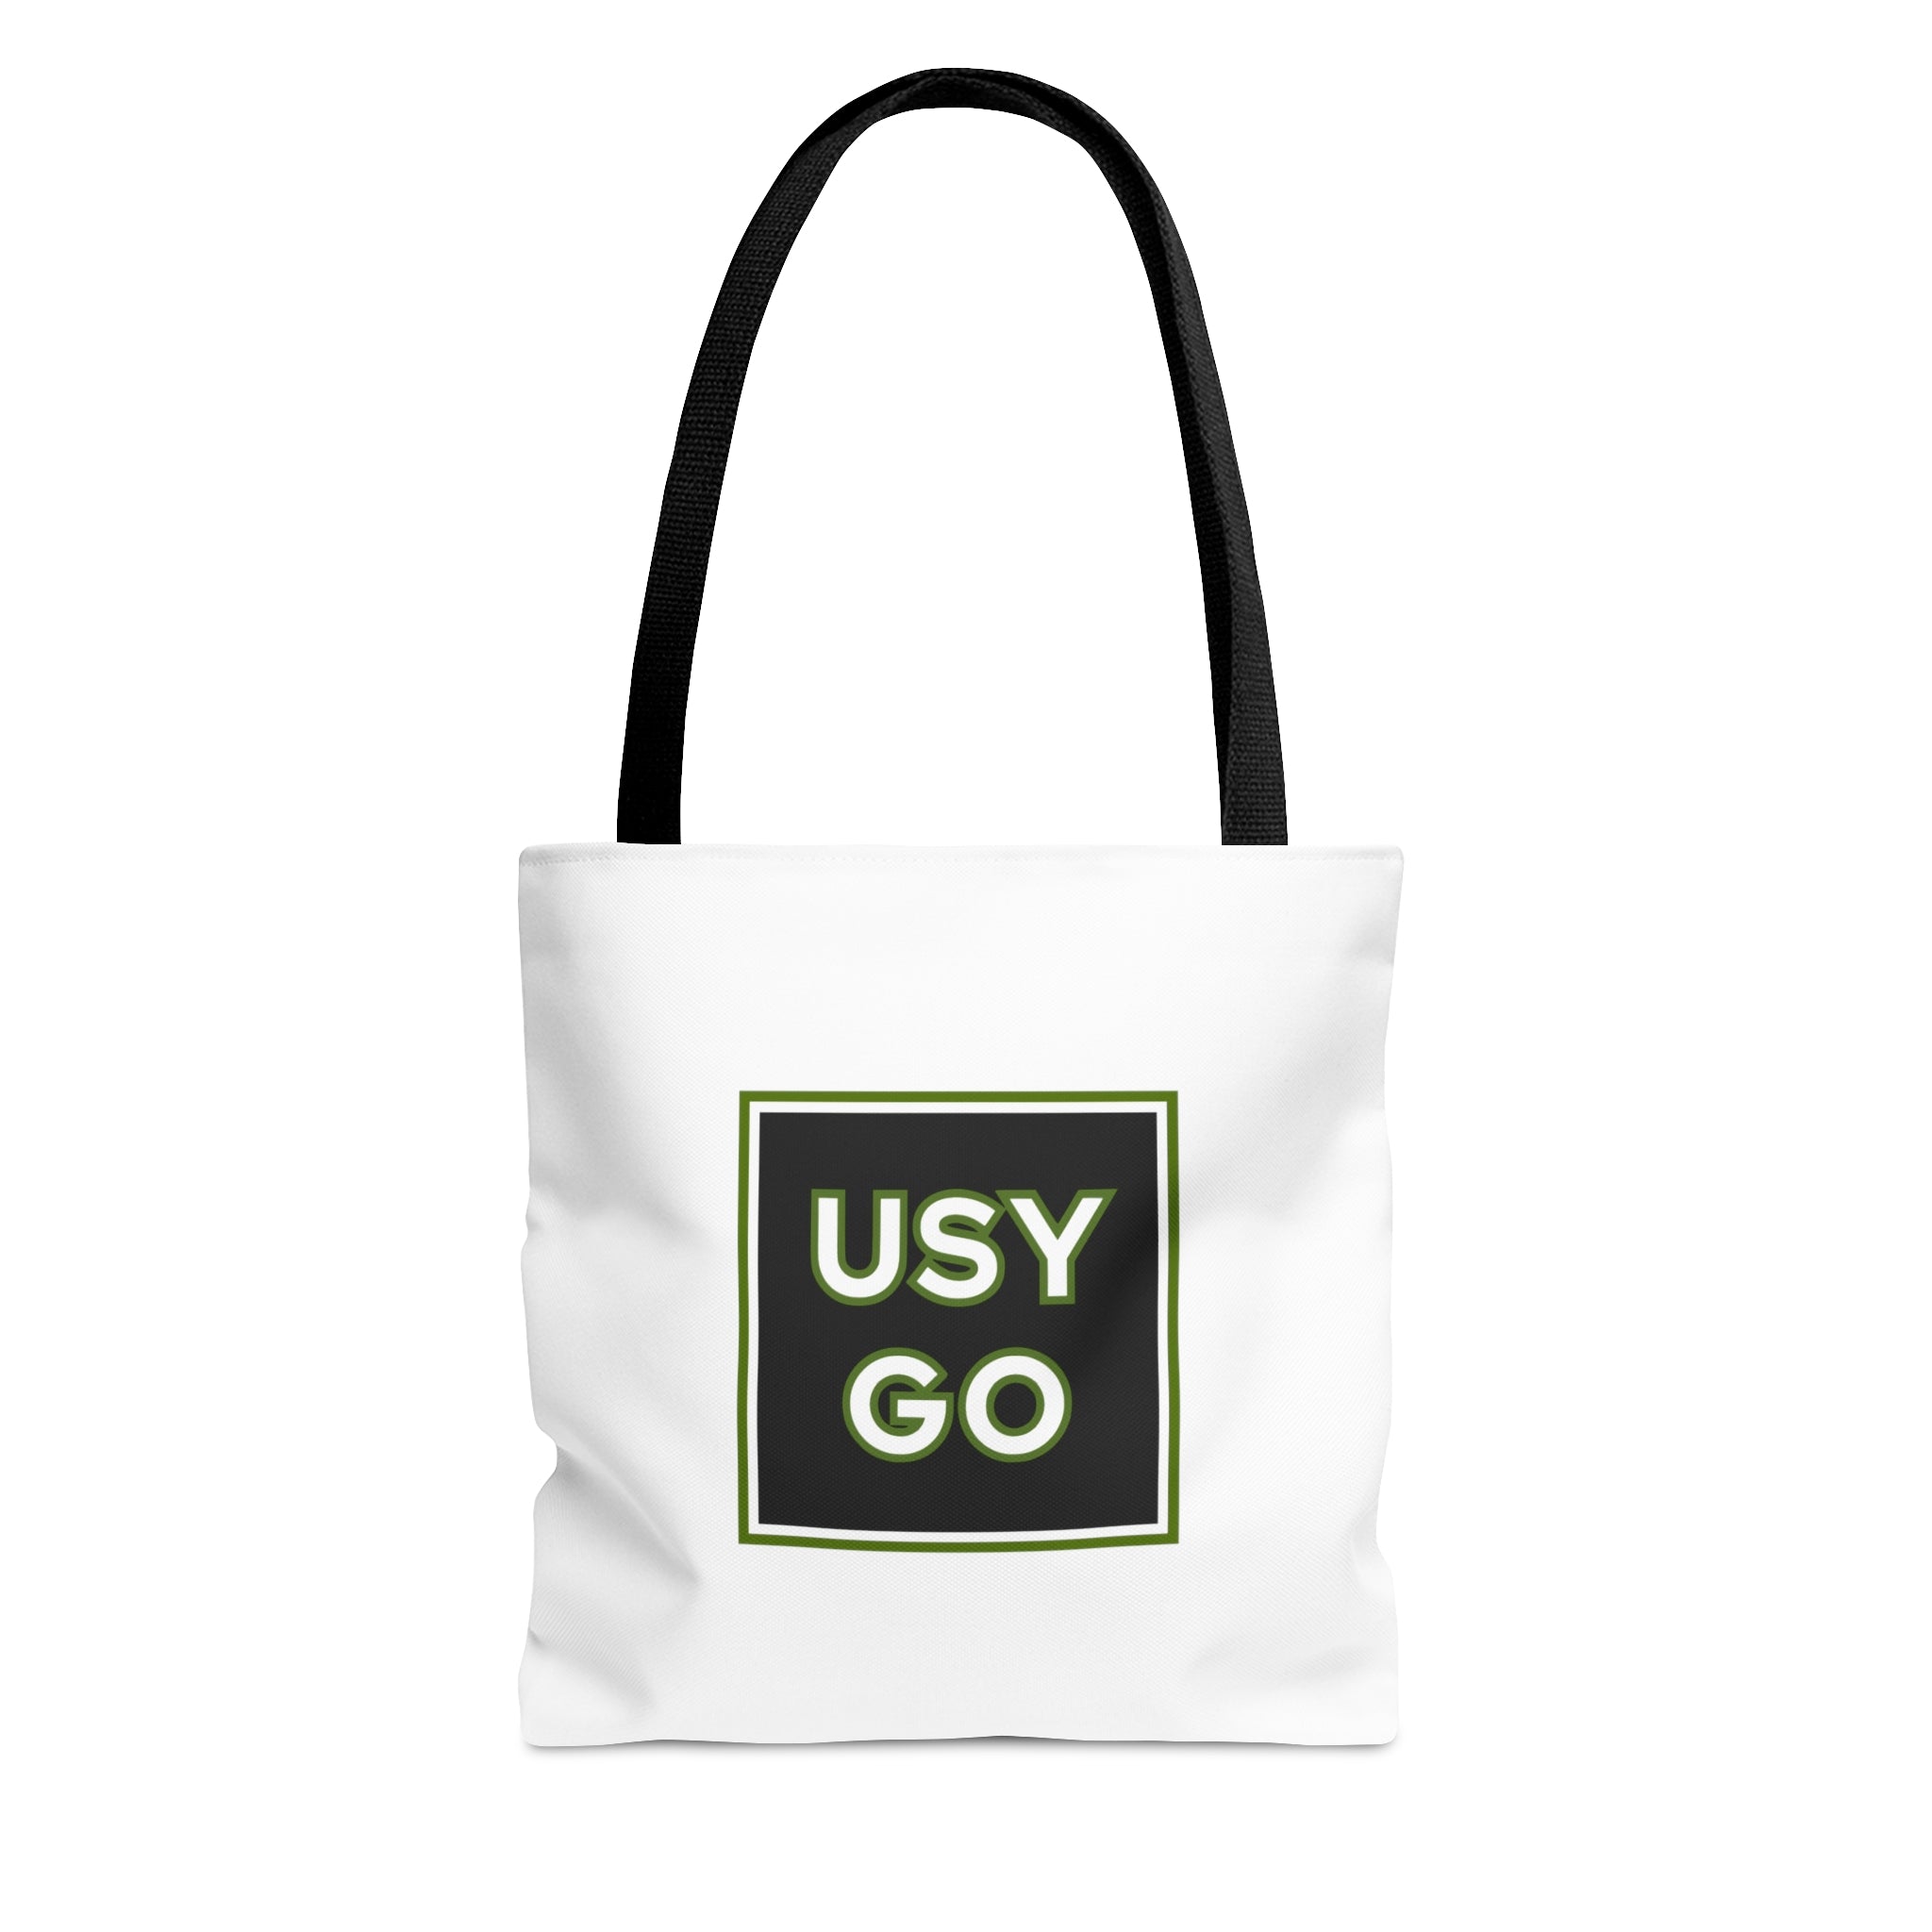 White USYGO Tote Bags in 3 Sizes